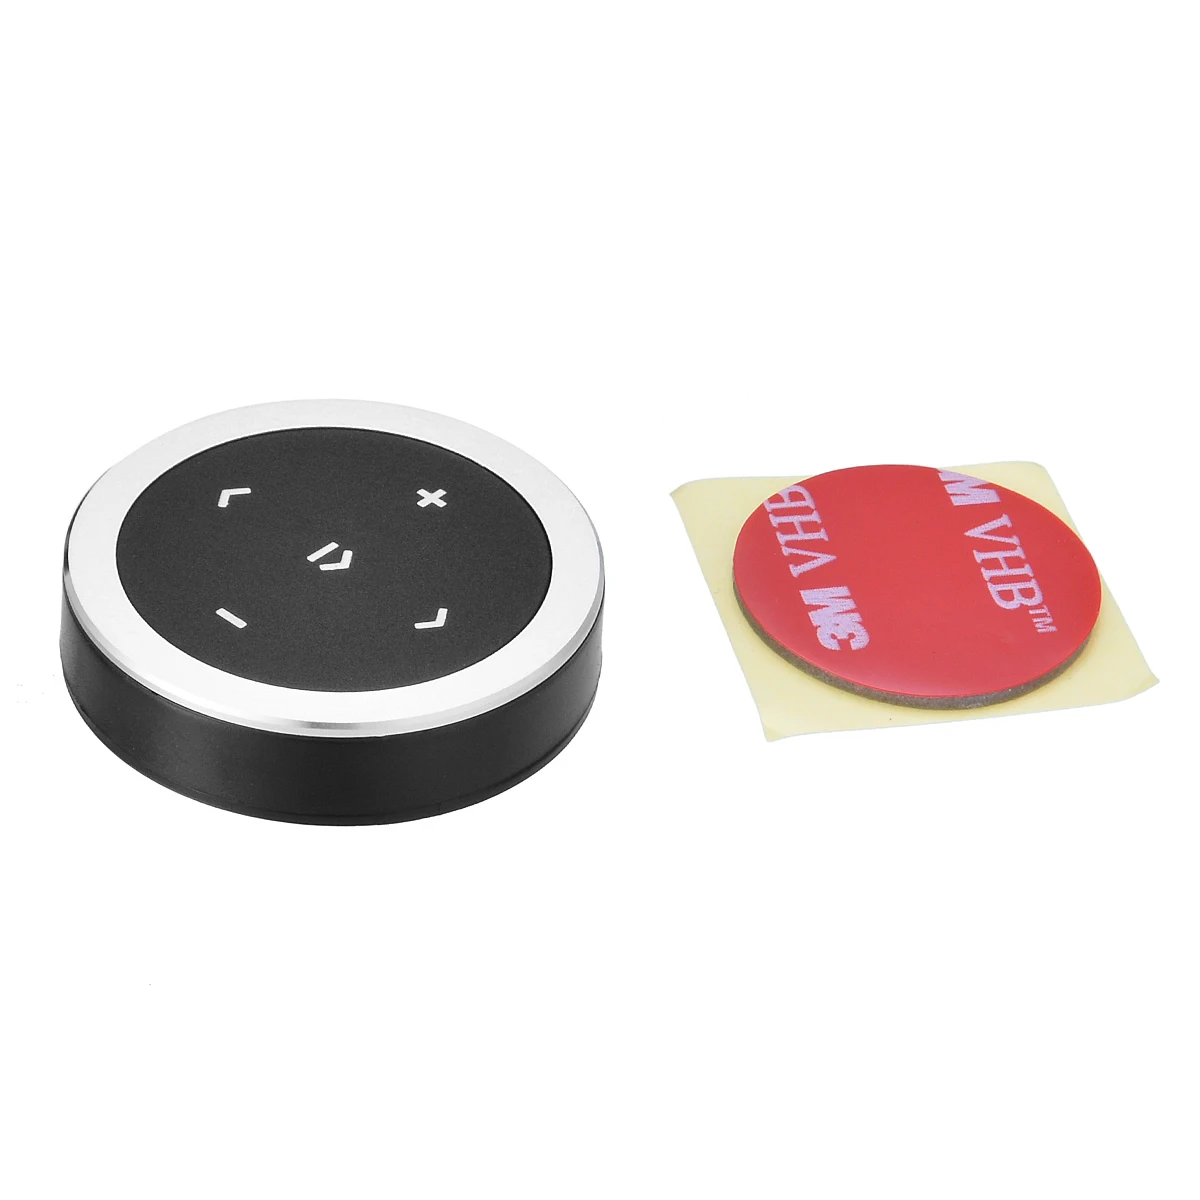 Mayitr 1pc Wireless Bluetooth 3.0 Media Button Car Motorcycle Steering Wheel Music Play Remote Control for iOS/Android